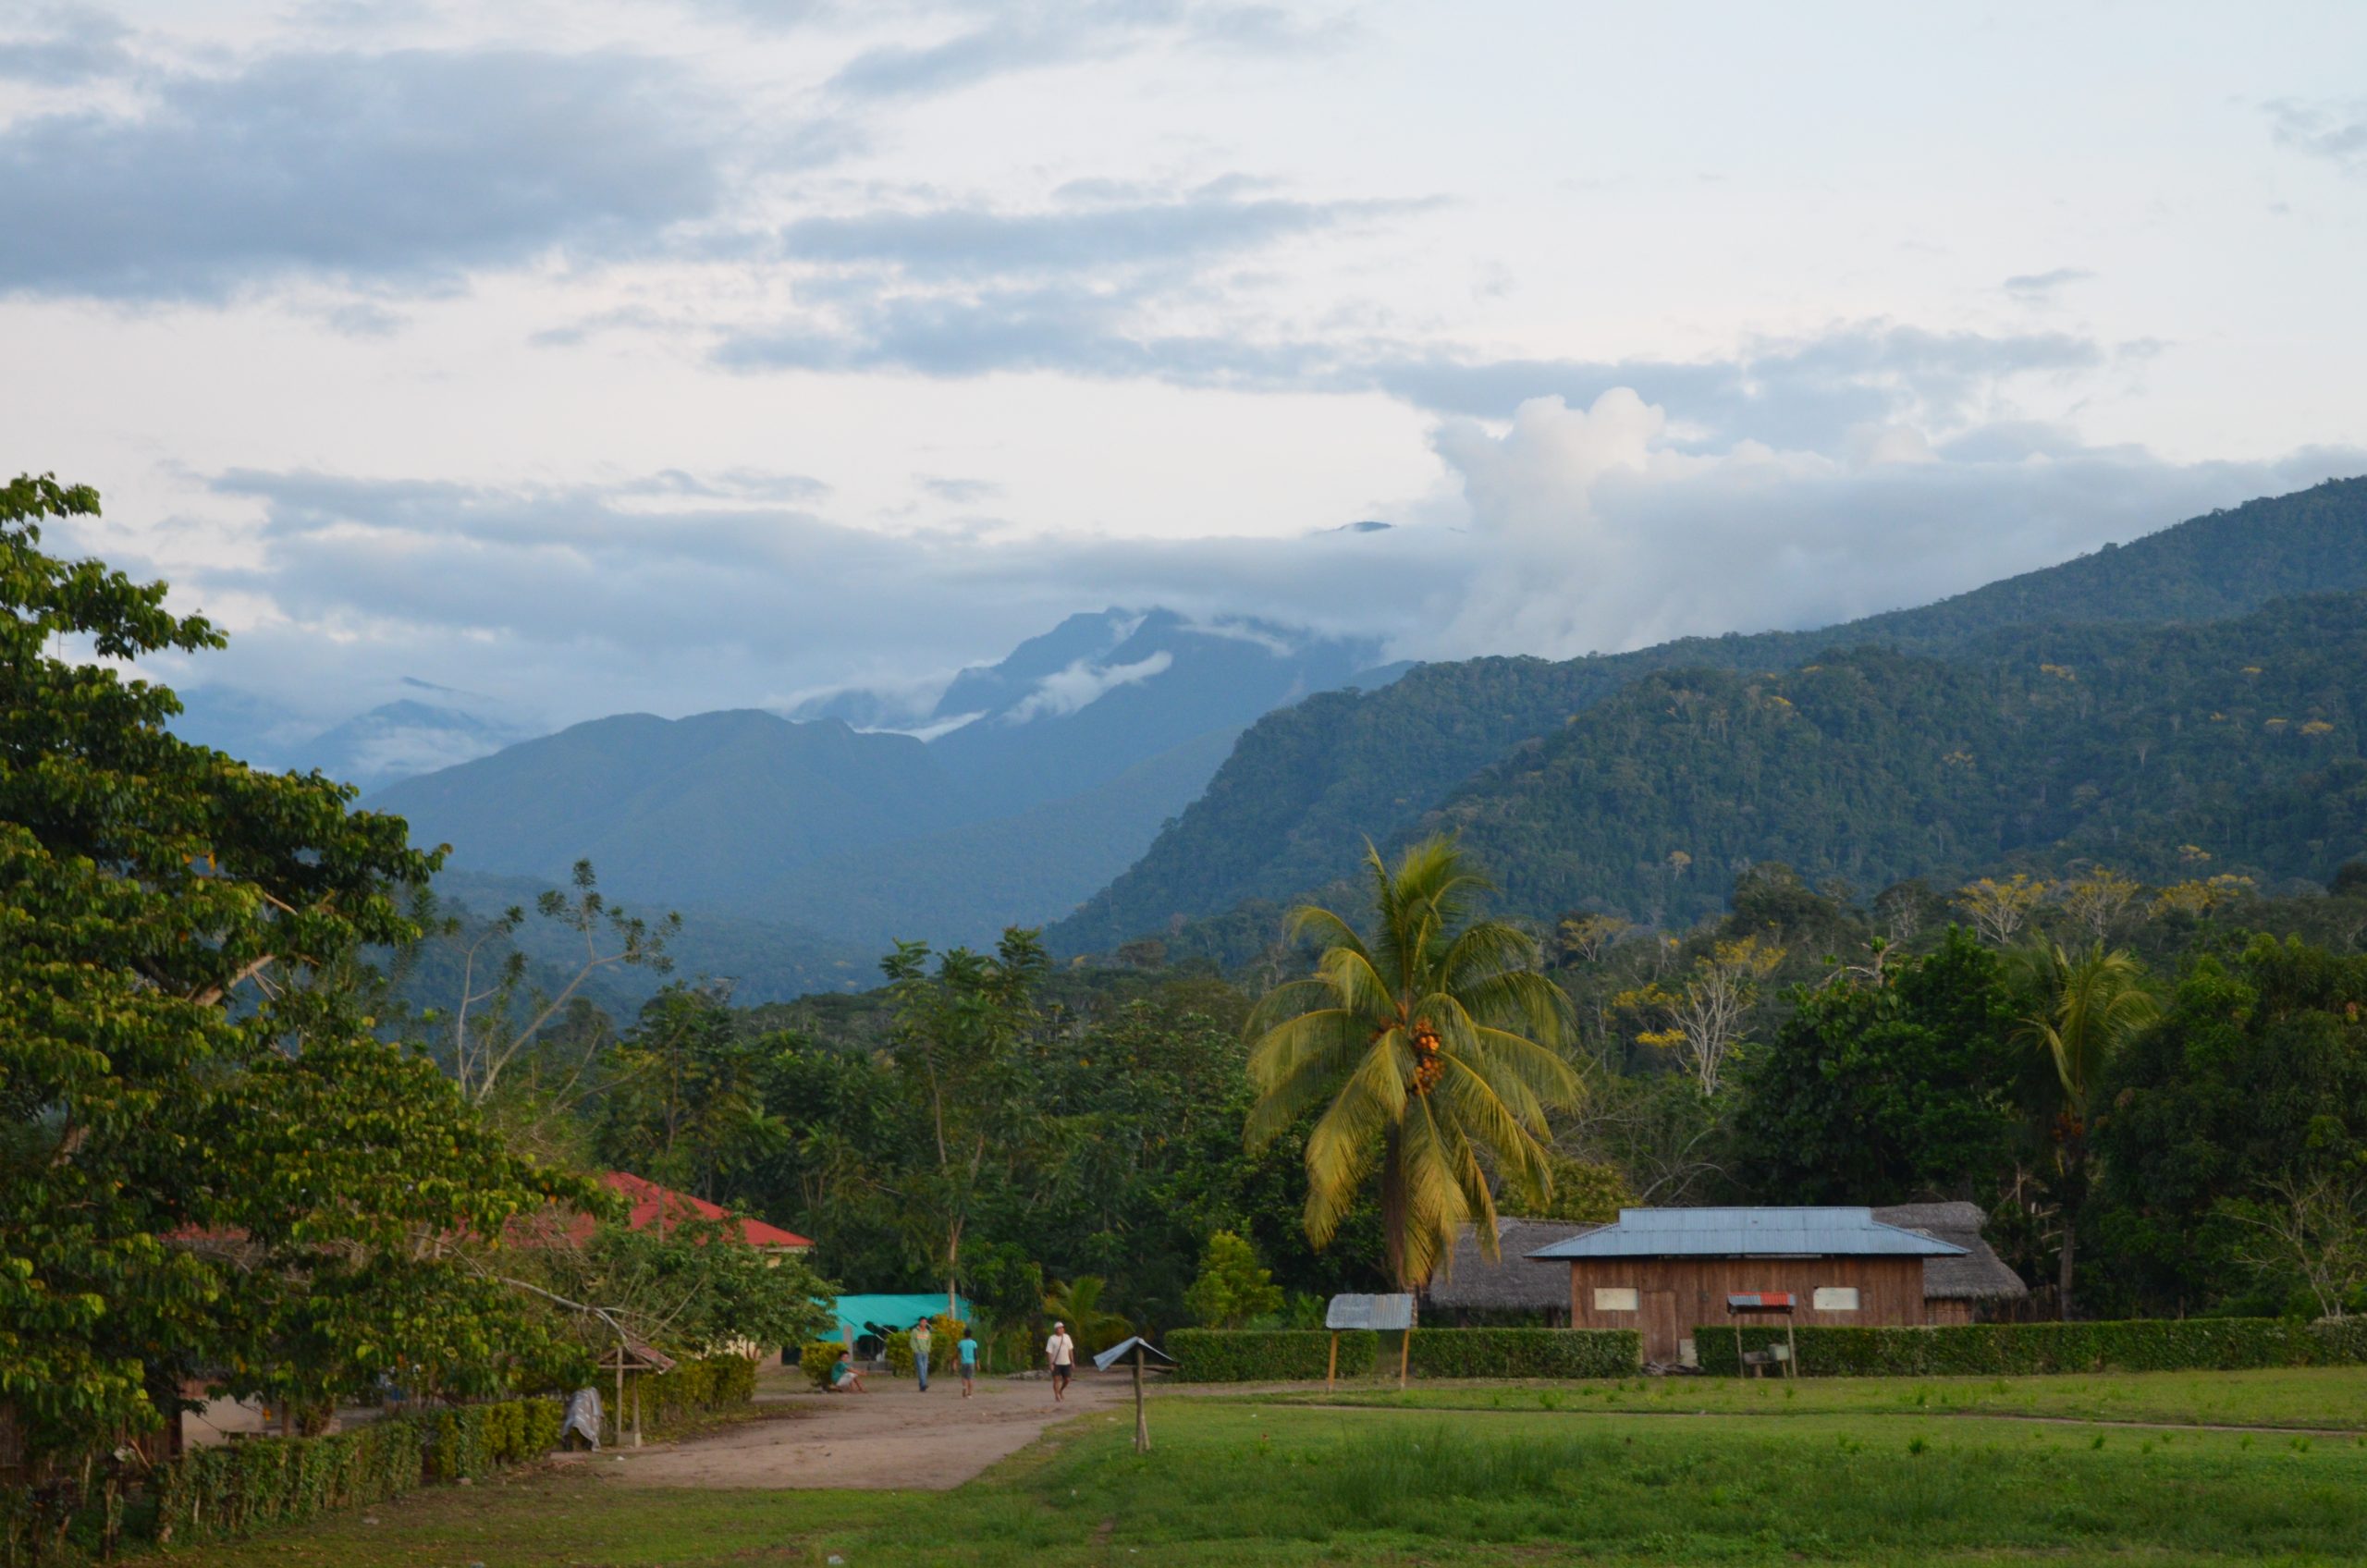 in the foreground there is a grass field, buildings surrounded by trees can be seen, in the background rainforest covered mountains stretch into the distance topped with clouds. 